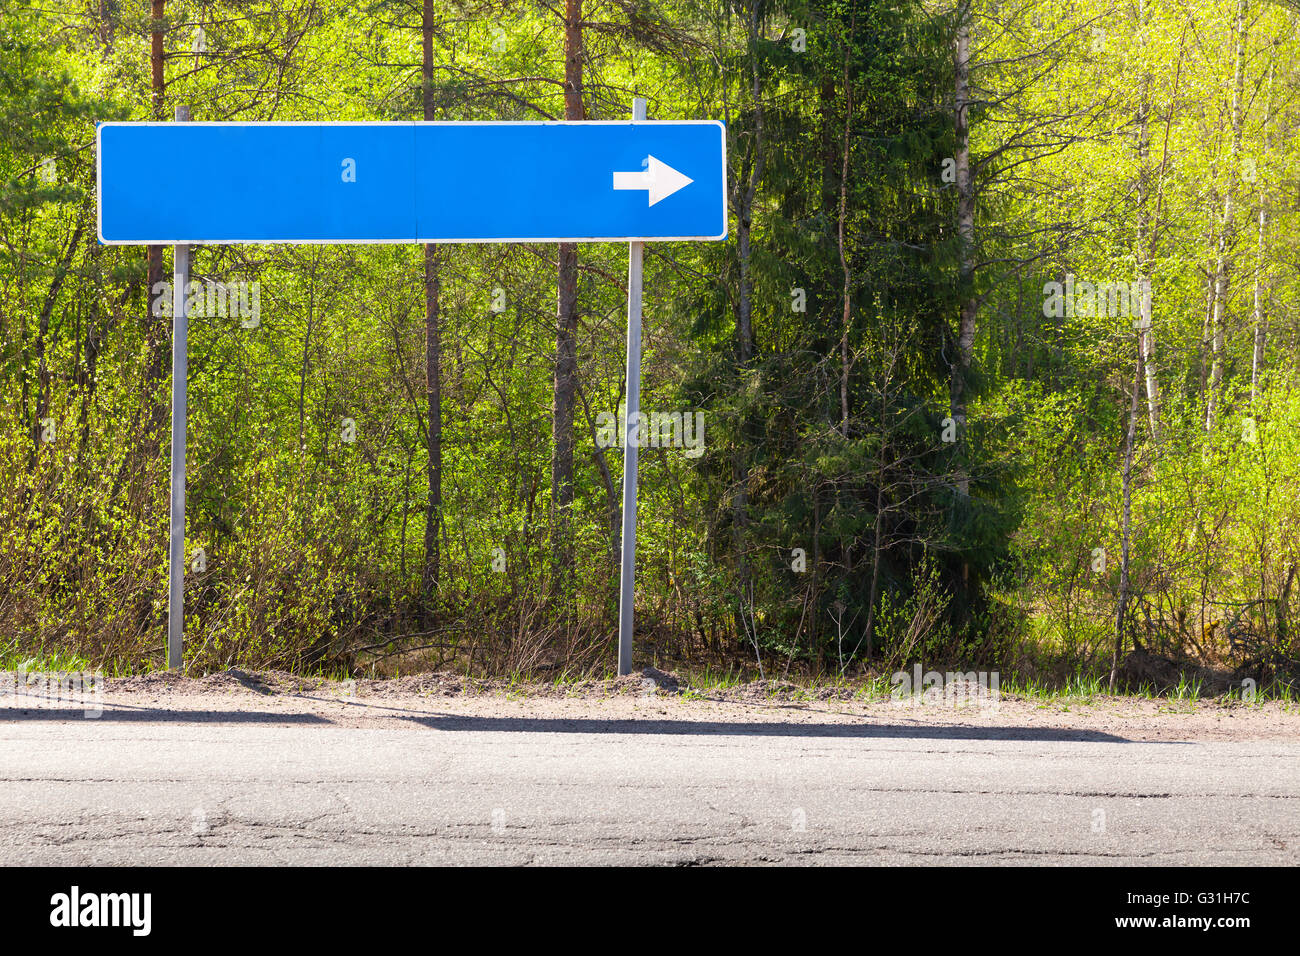 what are those green or white signs with numbers that are placed along interstate highways